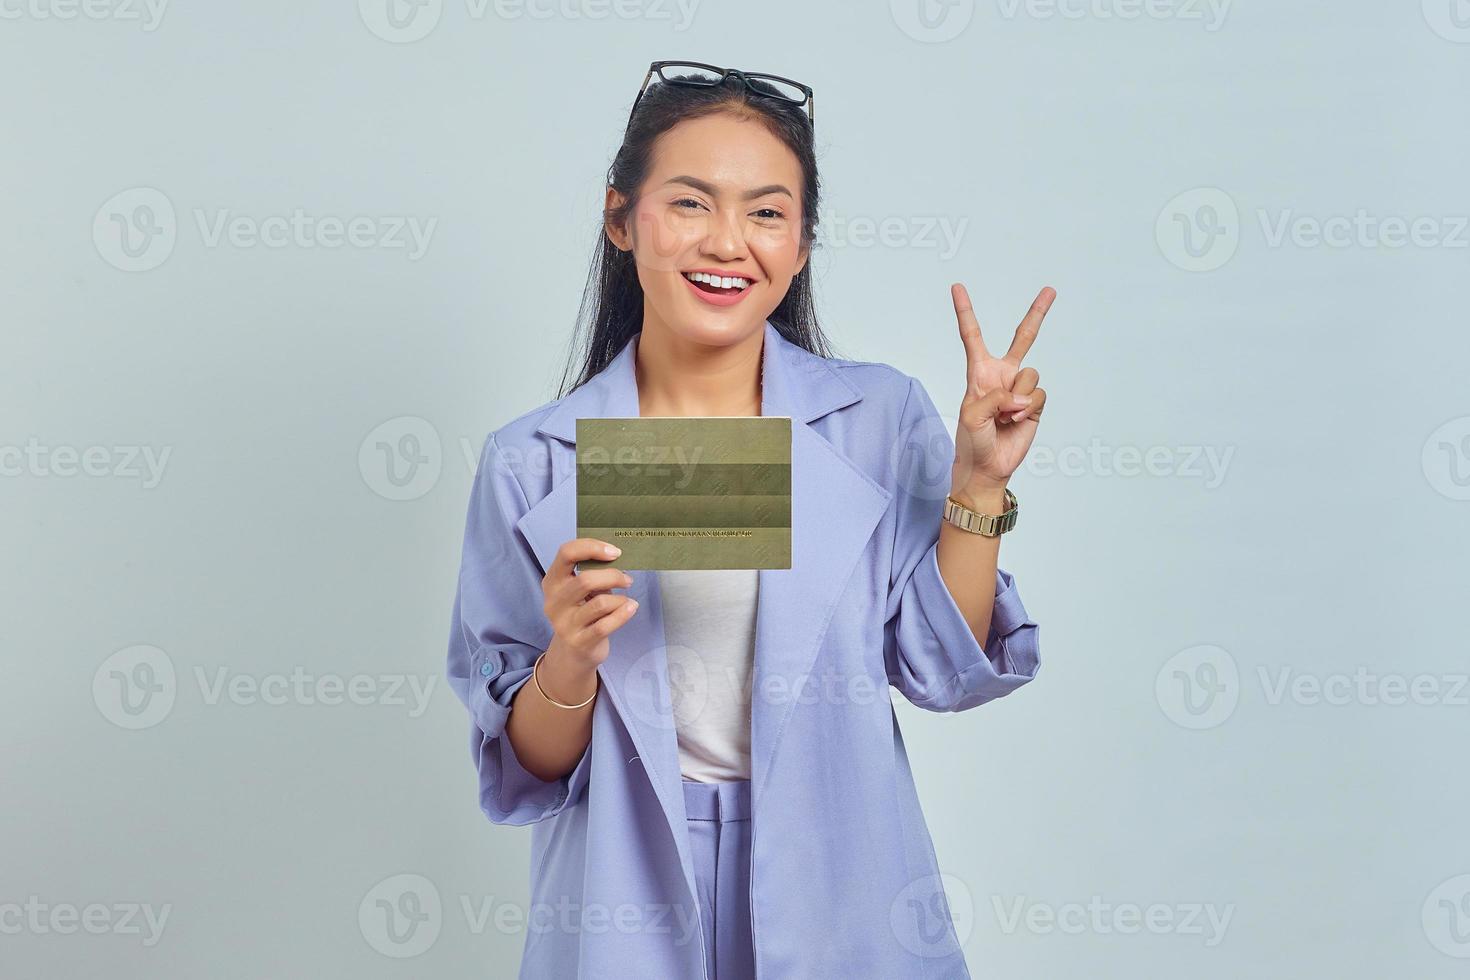 Portrait of cheerful young Asian woman holding vehicle book and showing peace sign with fingers isolated on white background photo